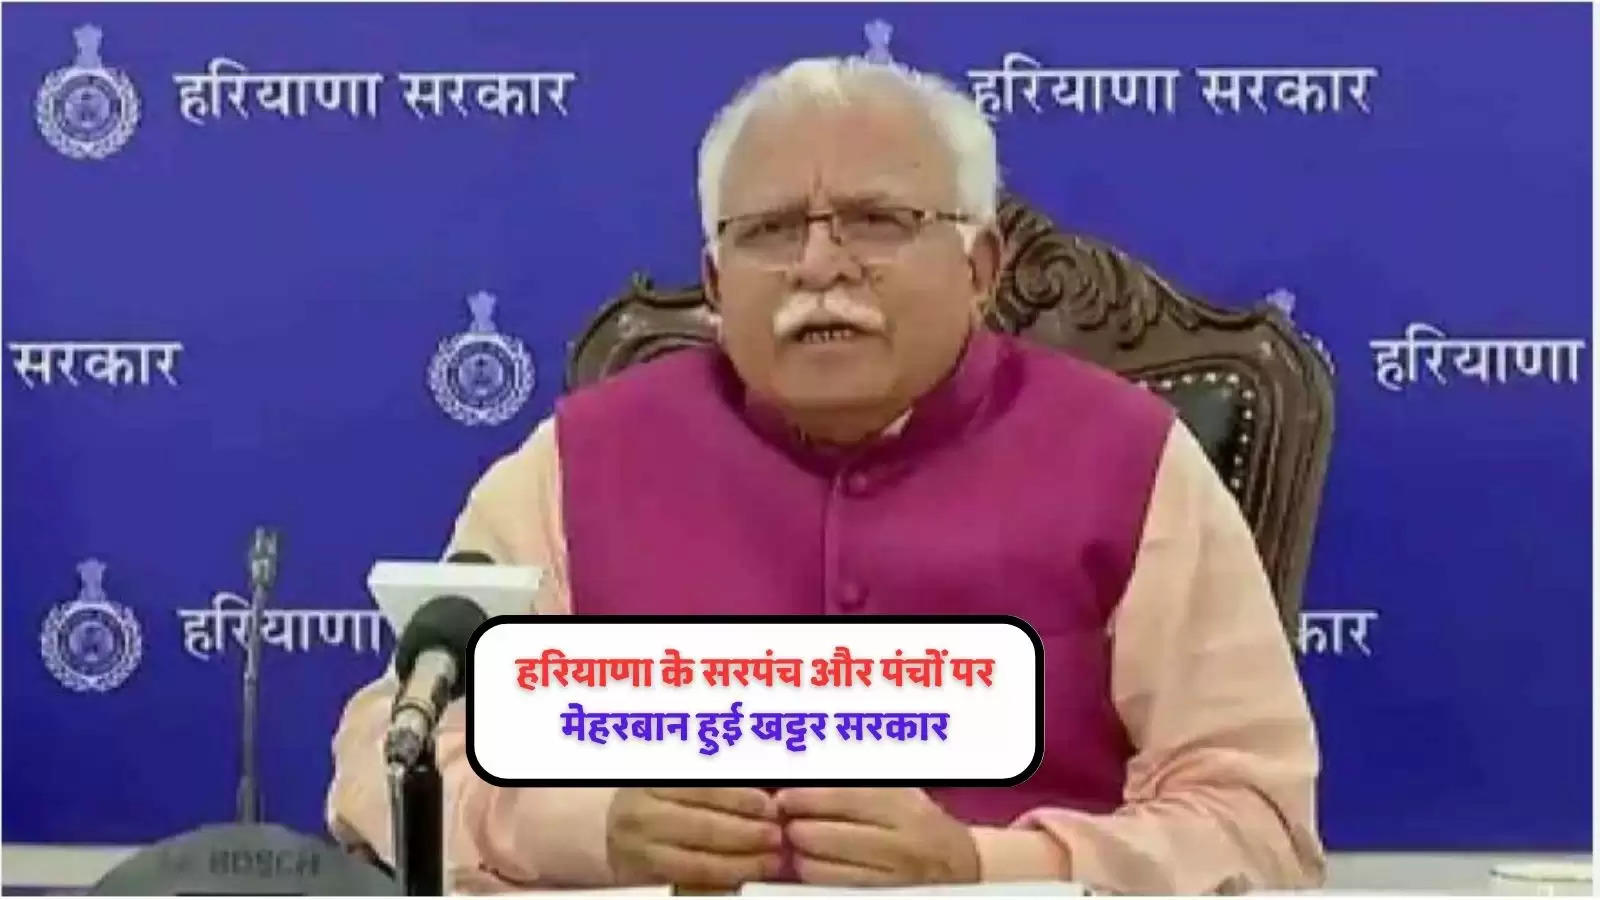 haryana-governments-big-gift-for-sarpanches-and-panches-now-they-will-get-this-much-honorarium-e